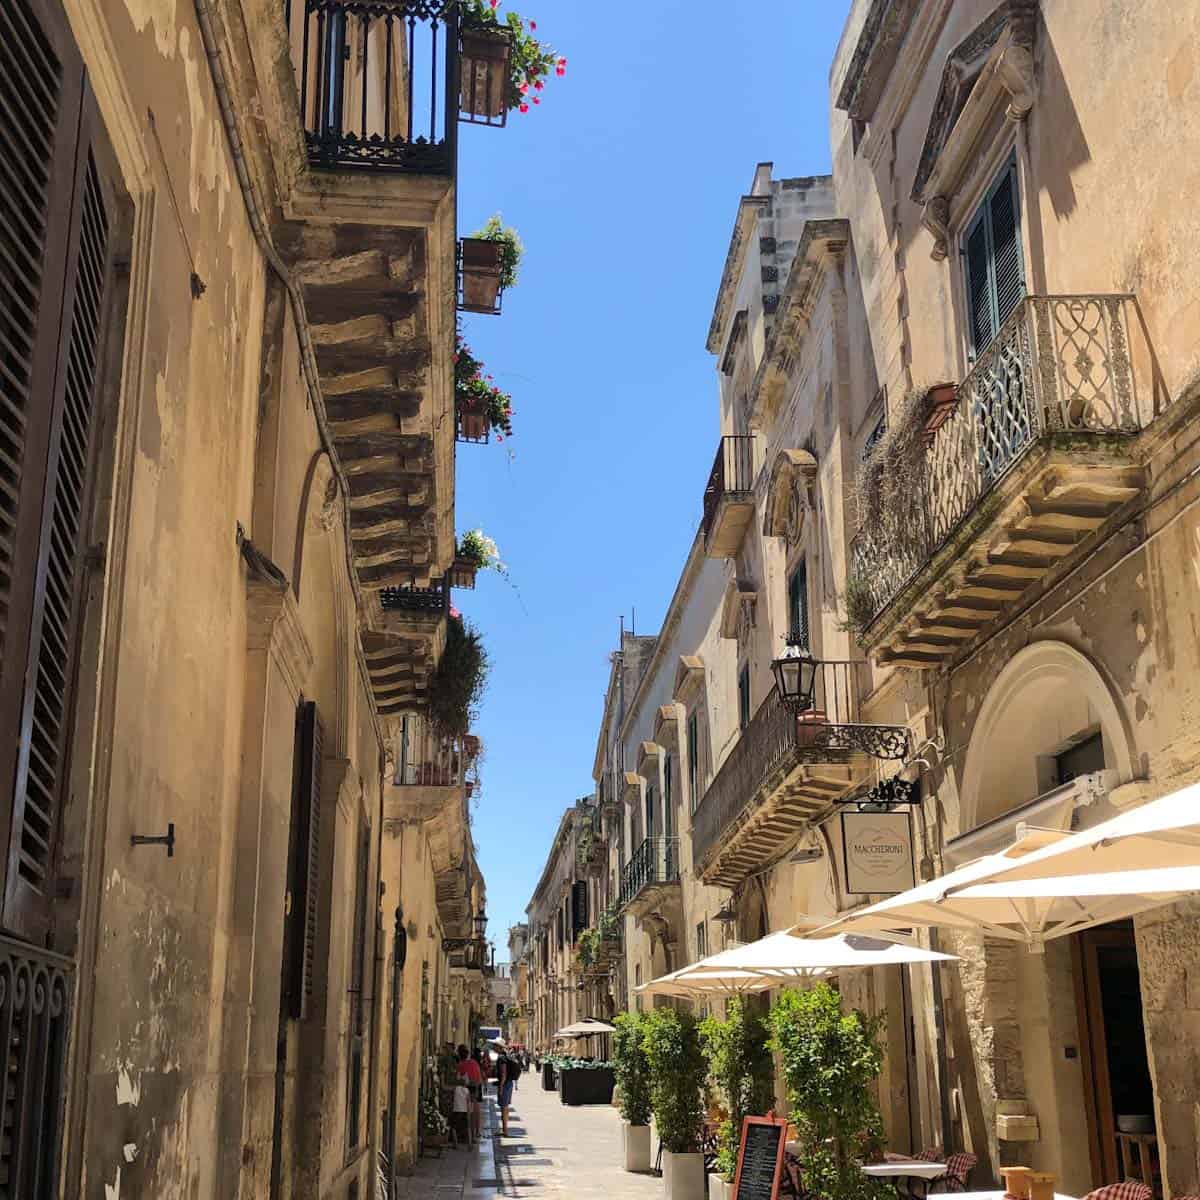 A narrow walking street in Lecce, Italy with Baroque carved buildings and outdoor restaurant tables.